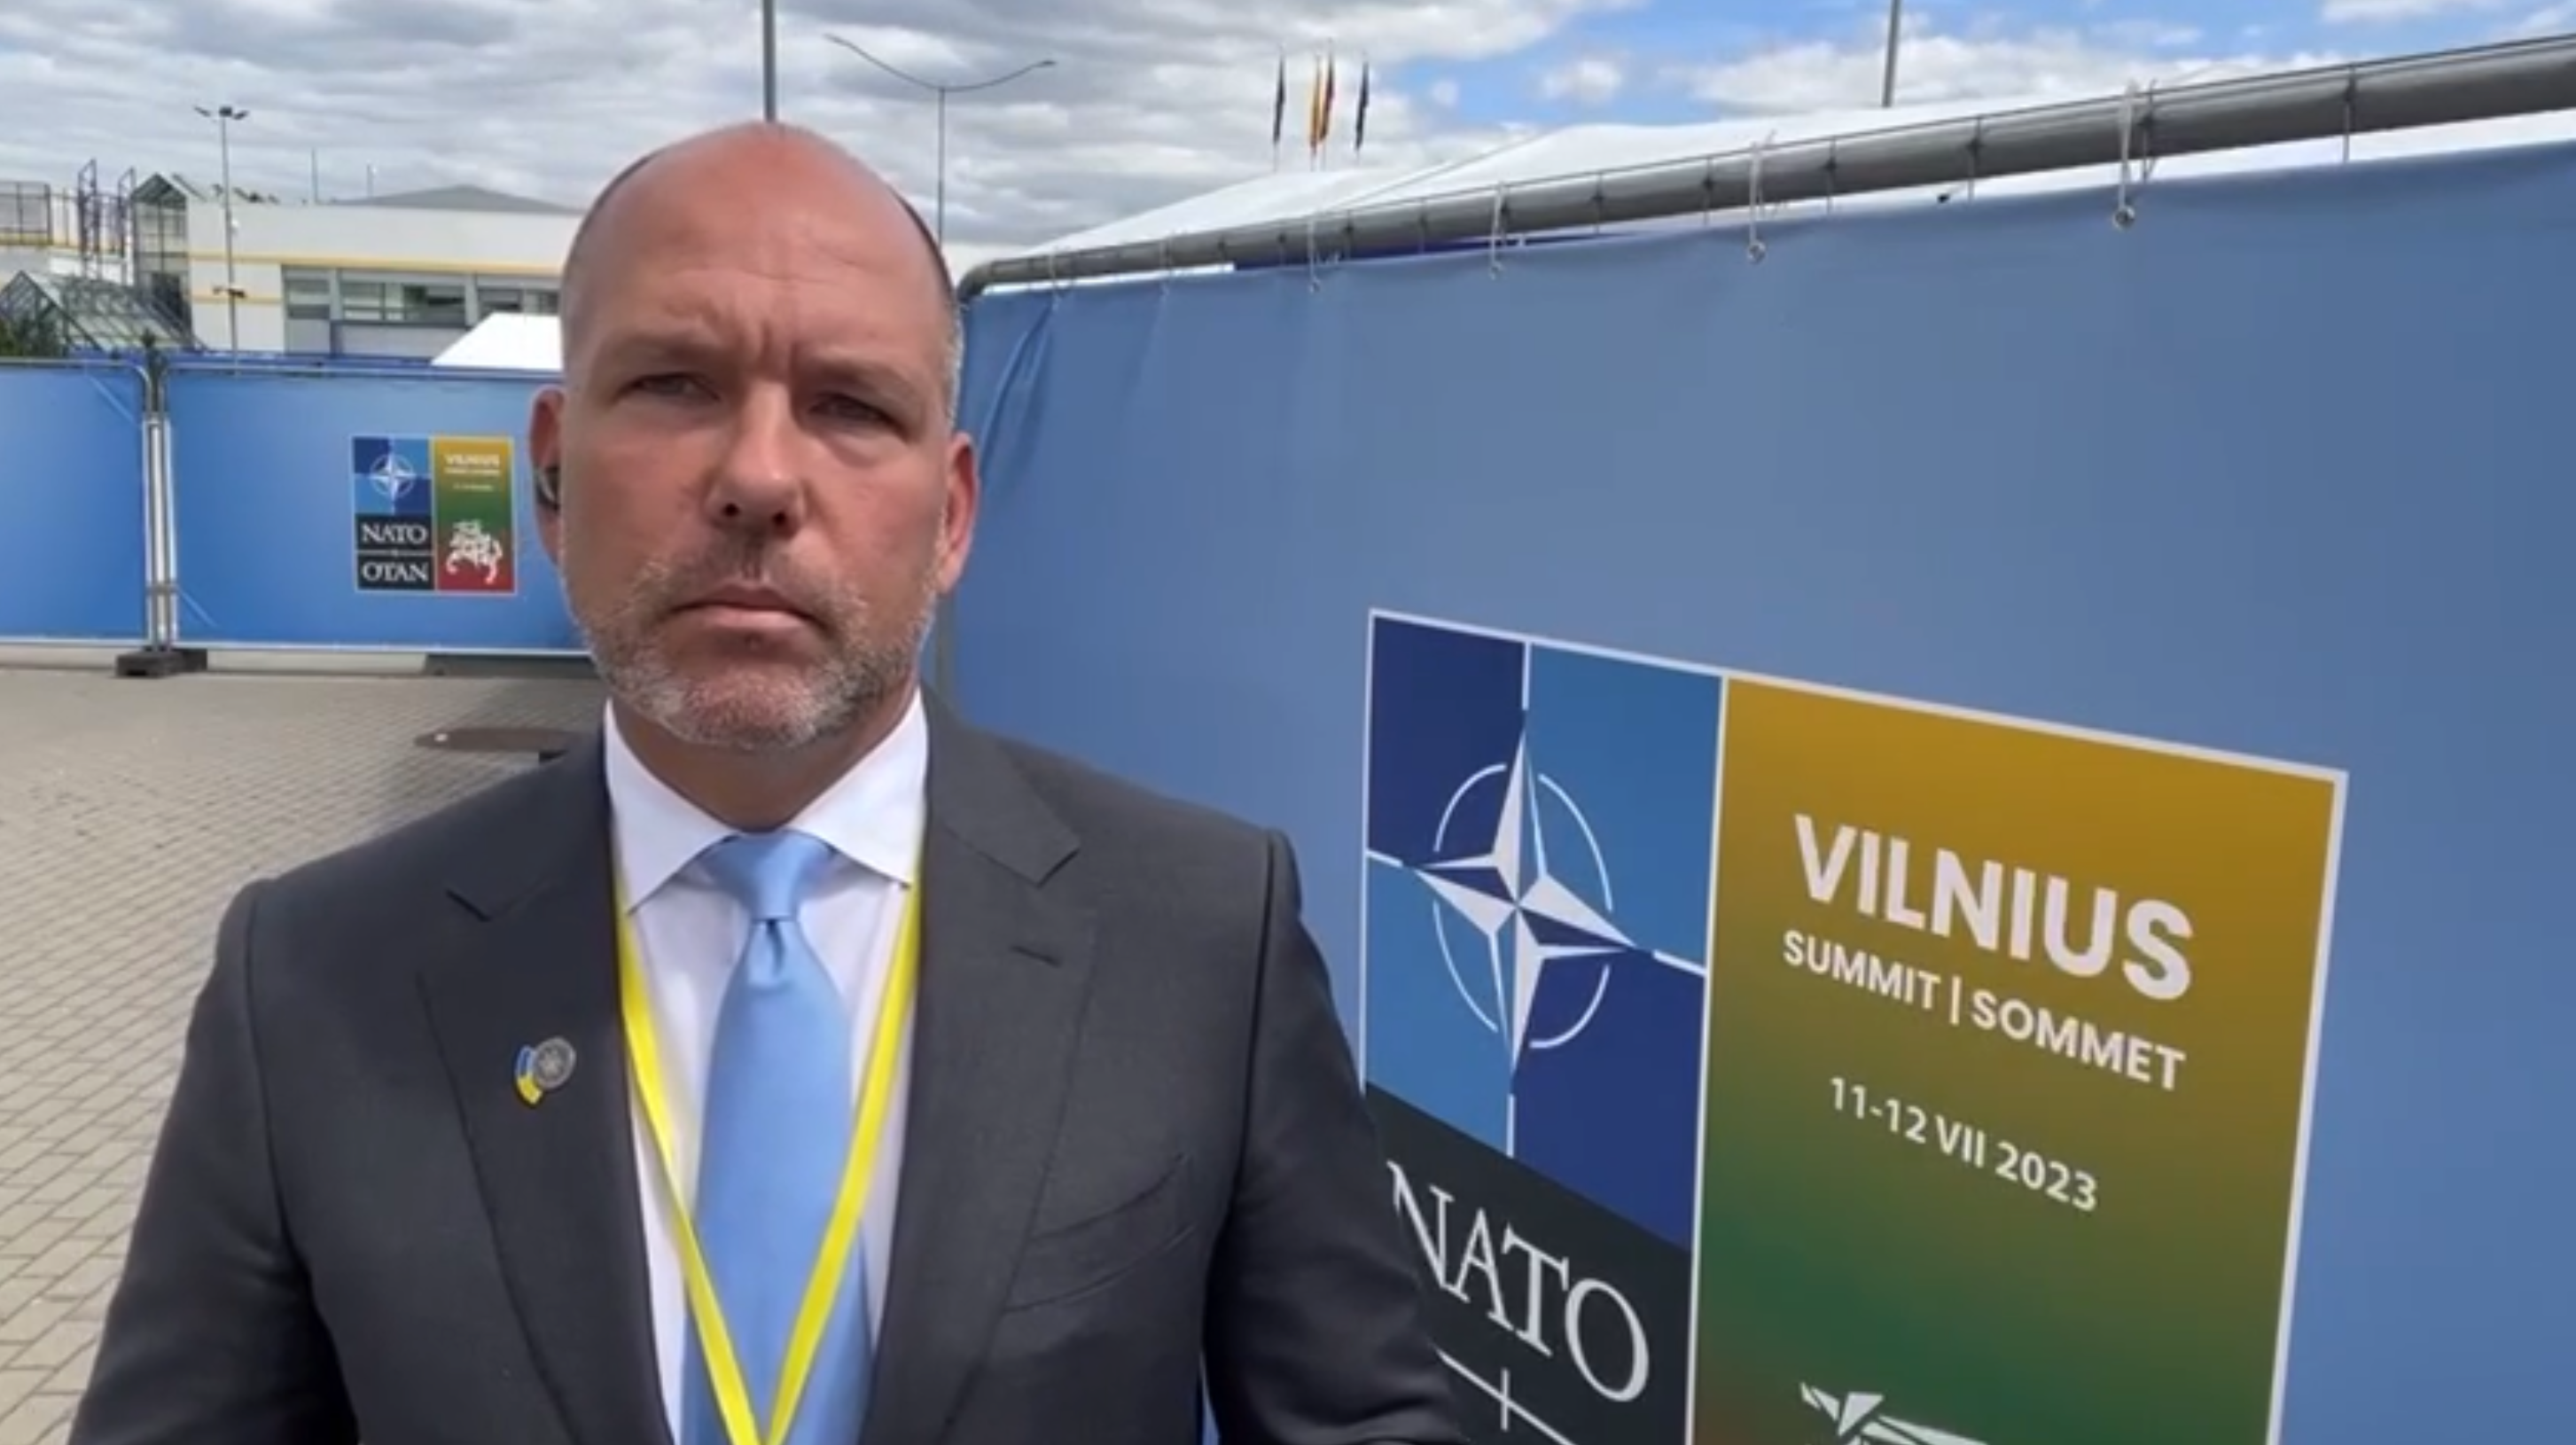 “We are not giving up”: UWC president on NATO summit results